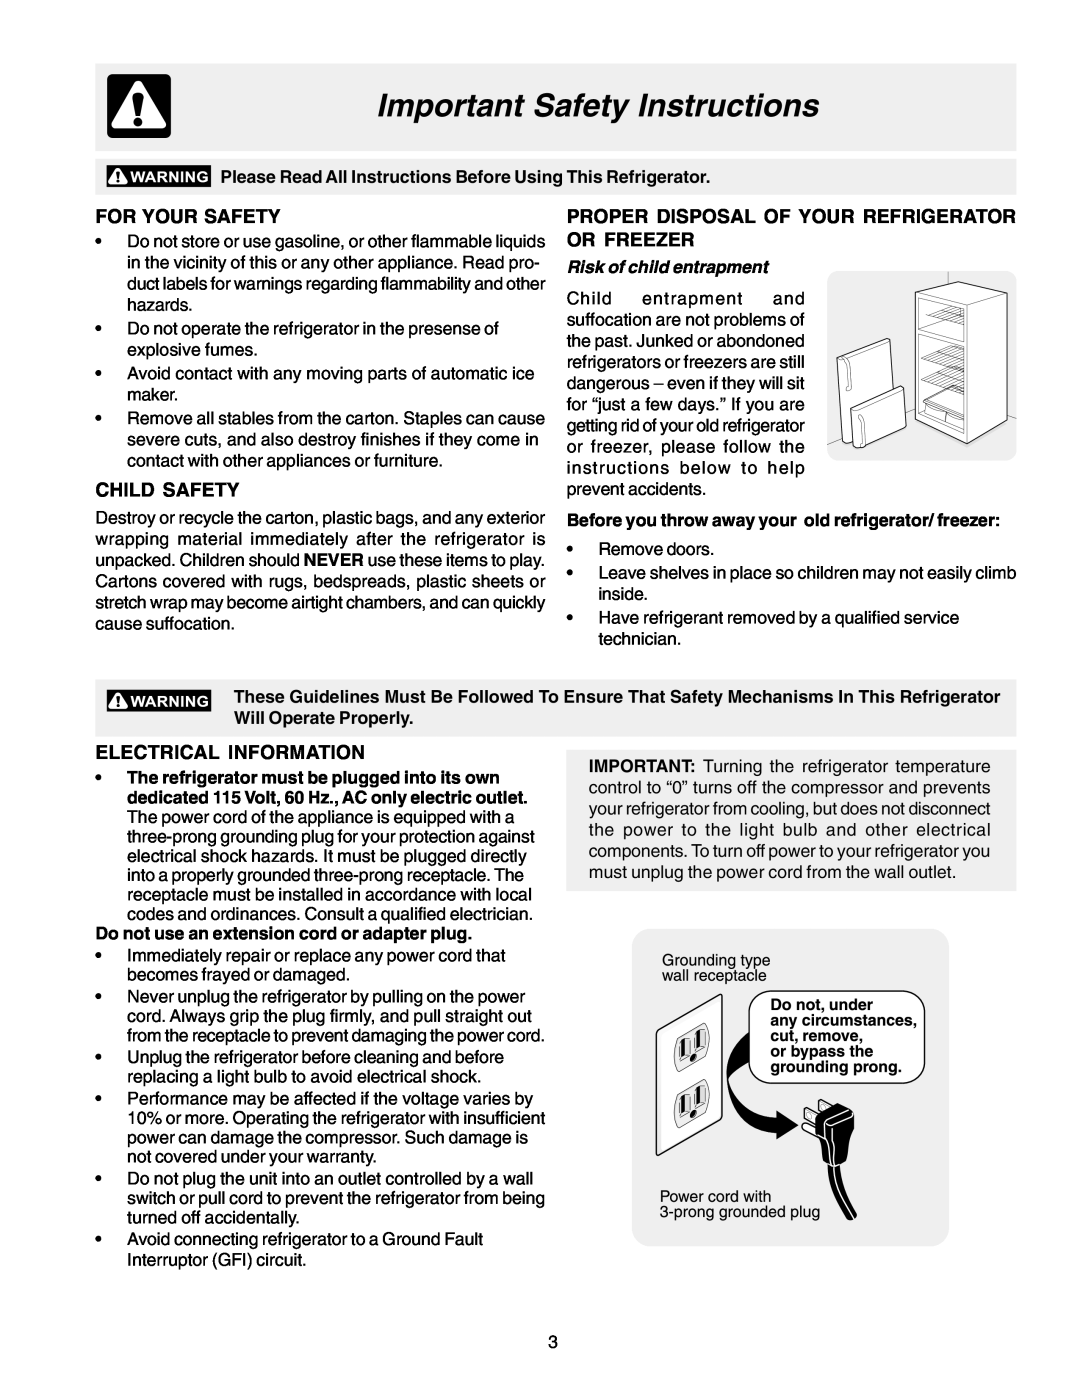 Frigidaire Frigidaire manual Important Safety Instructions, For Your Safety, Child Safety, Electrical Information 